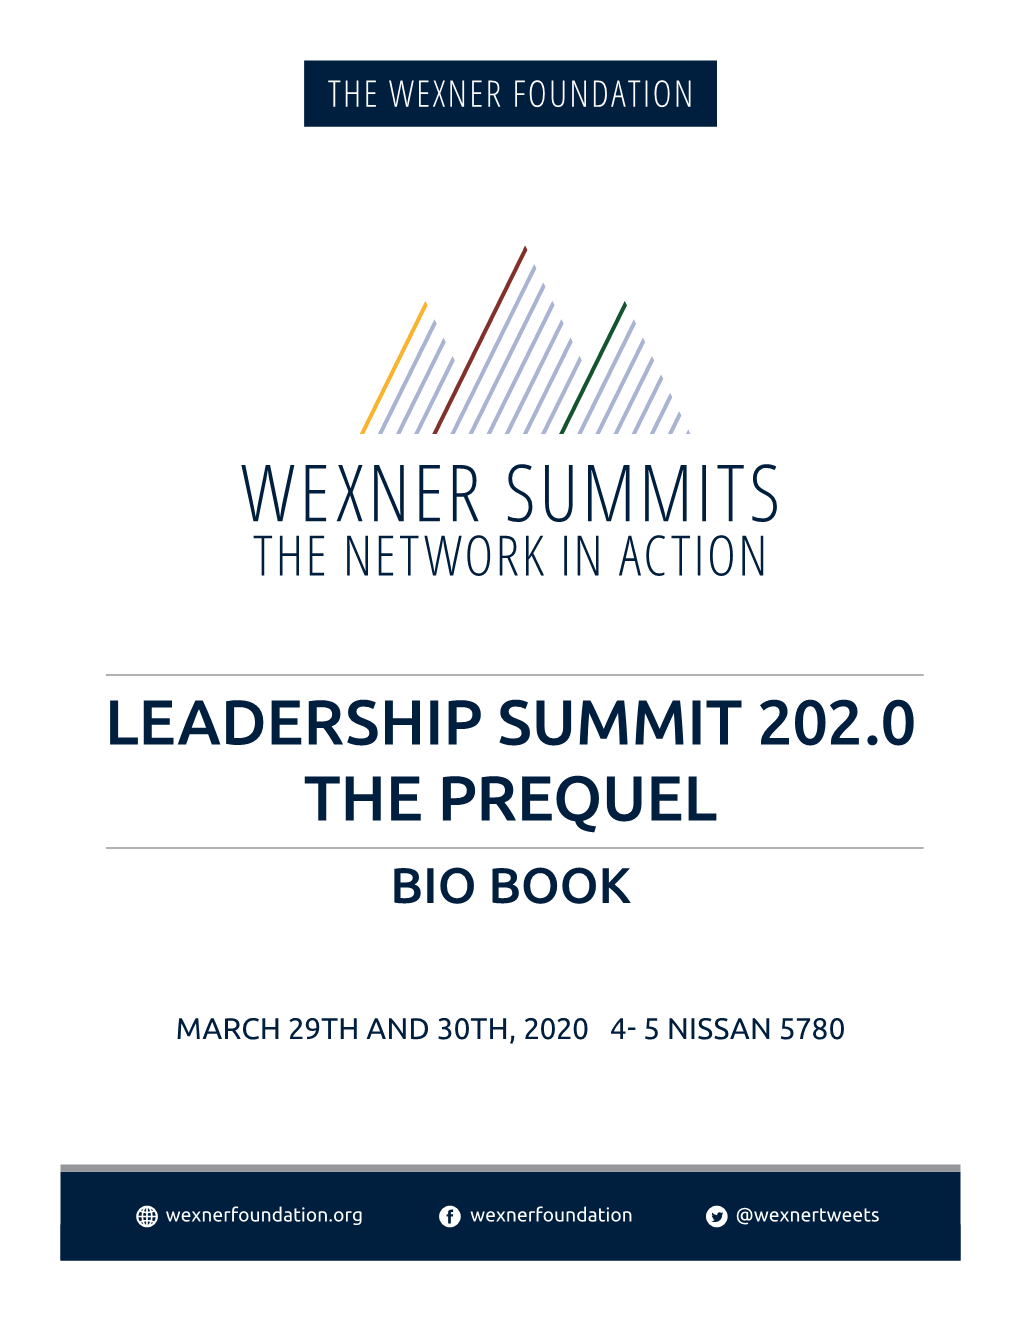 Wexner Summits the Network in Action